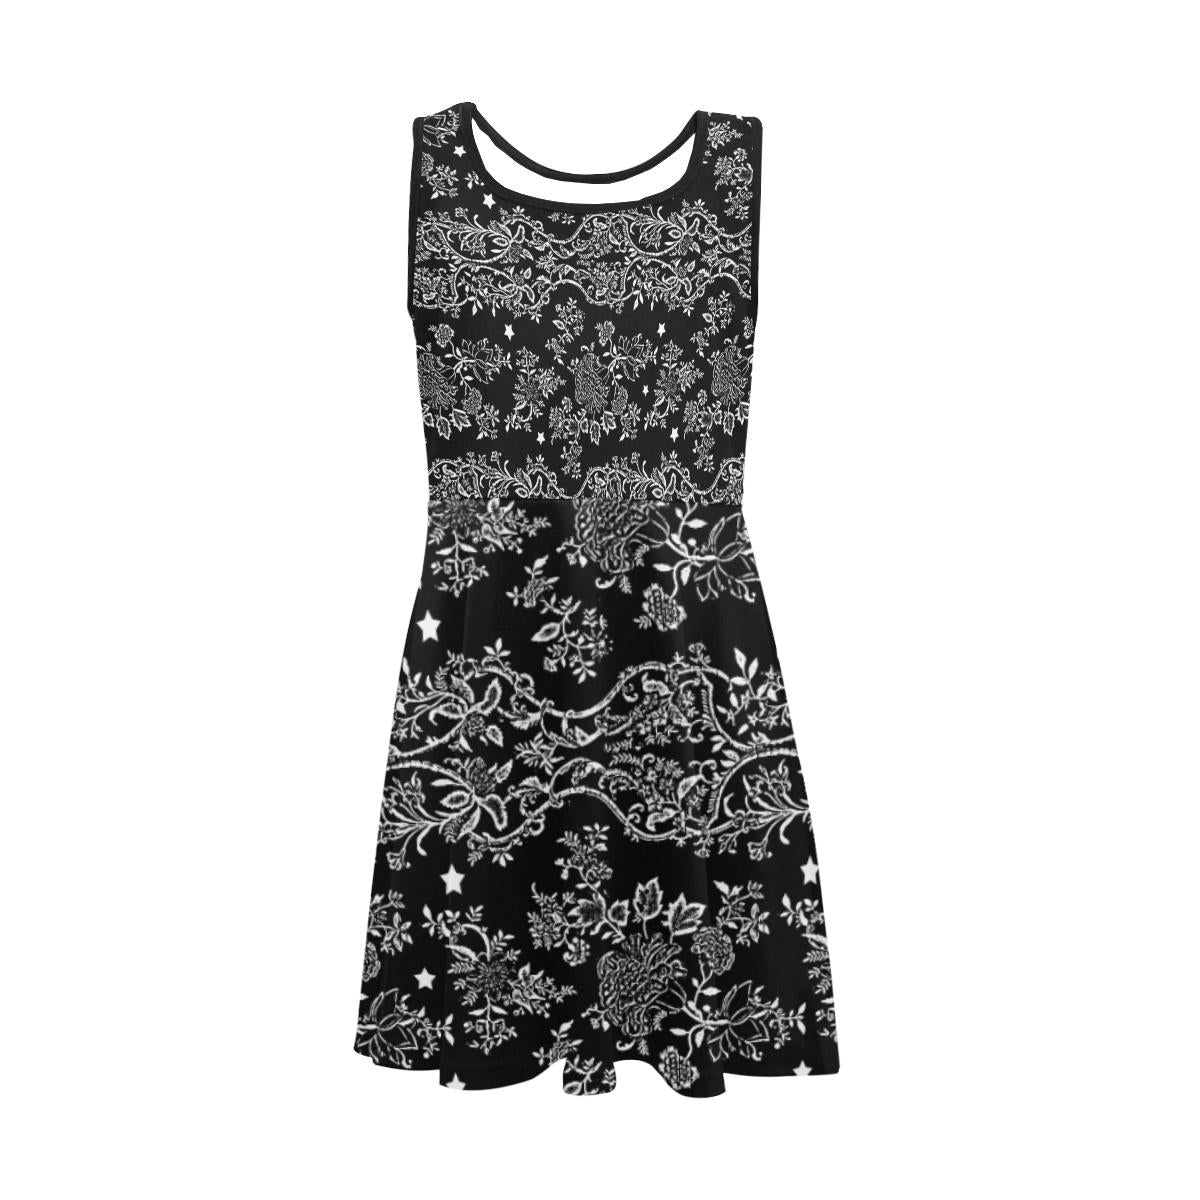 Lace N stars Black, skater dress by interestprint - East Hills Casuals